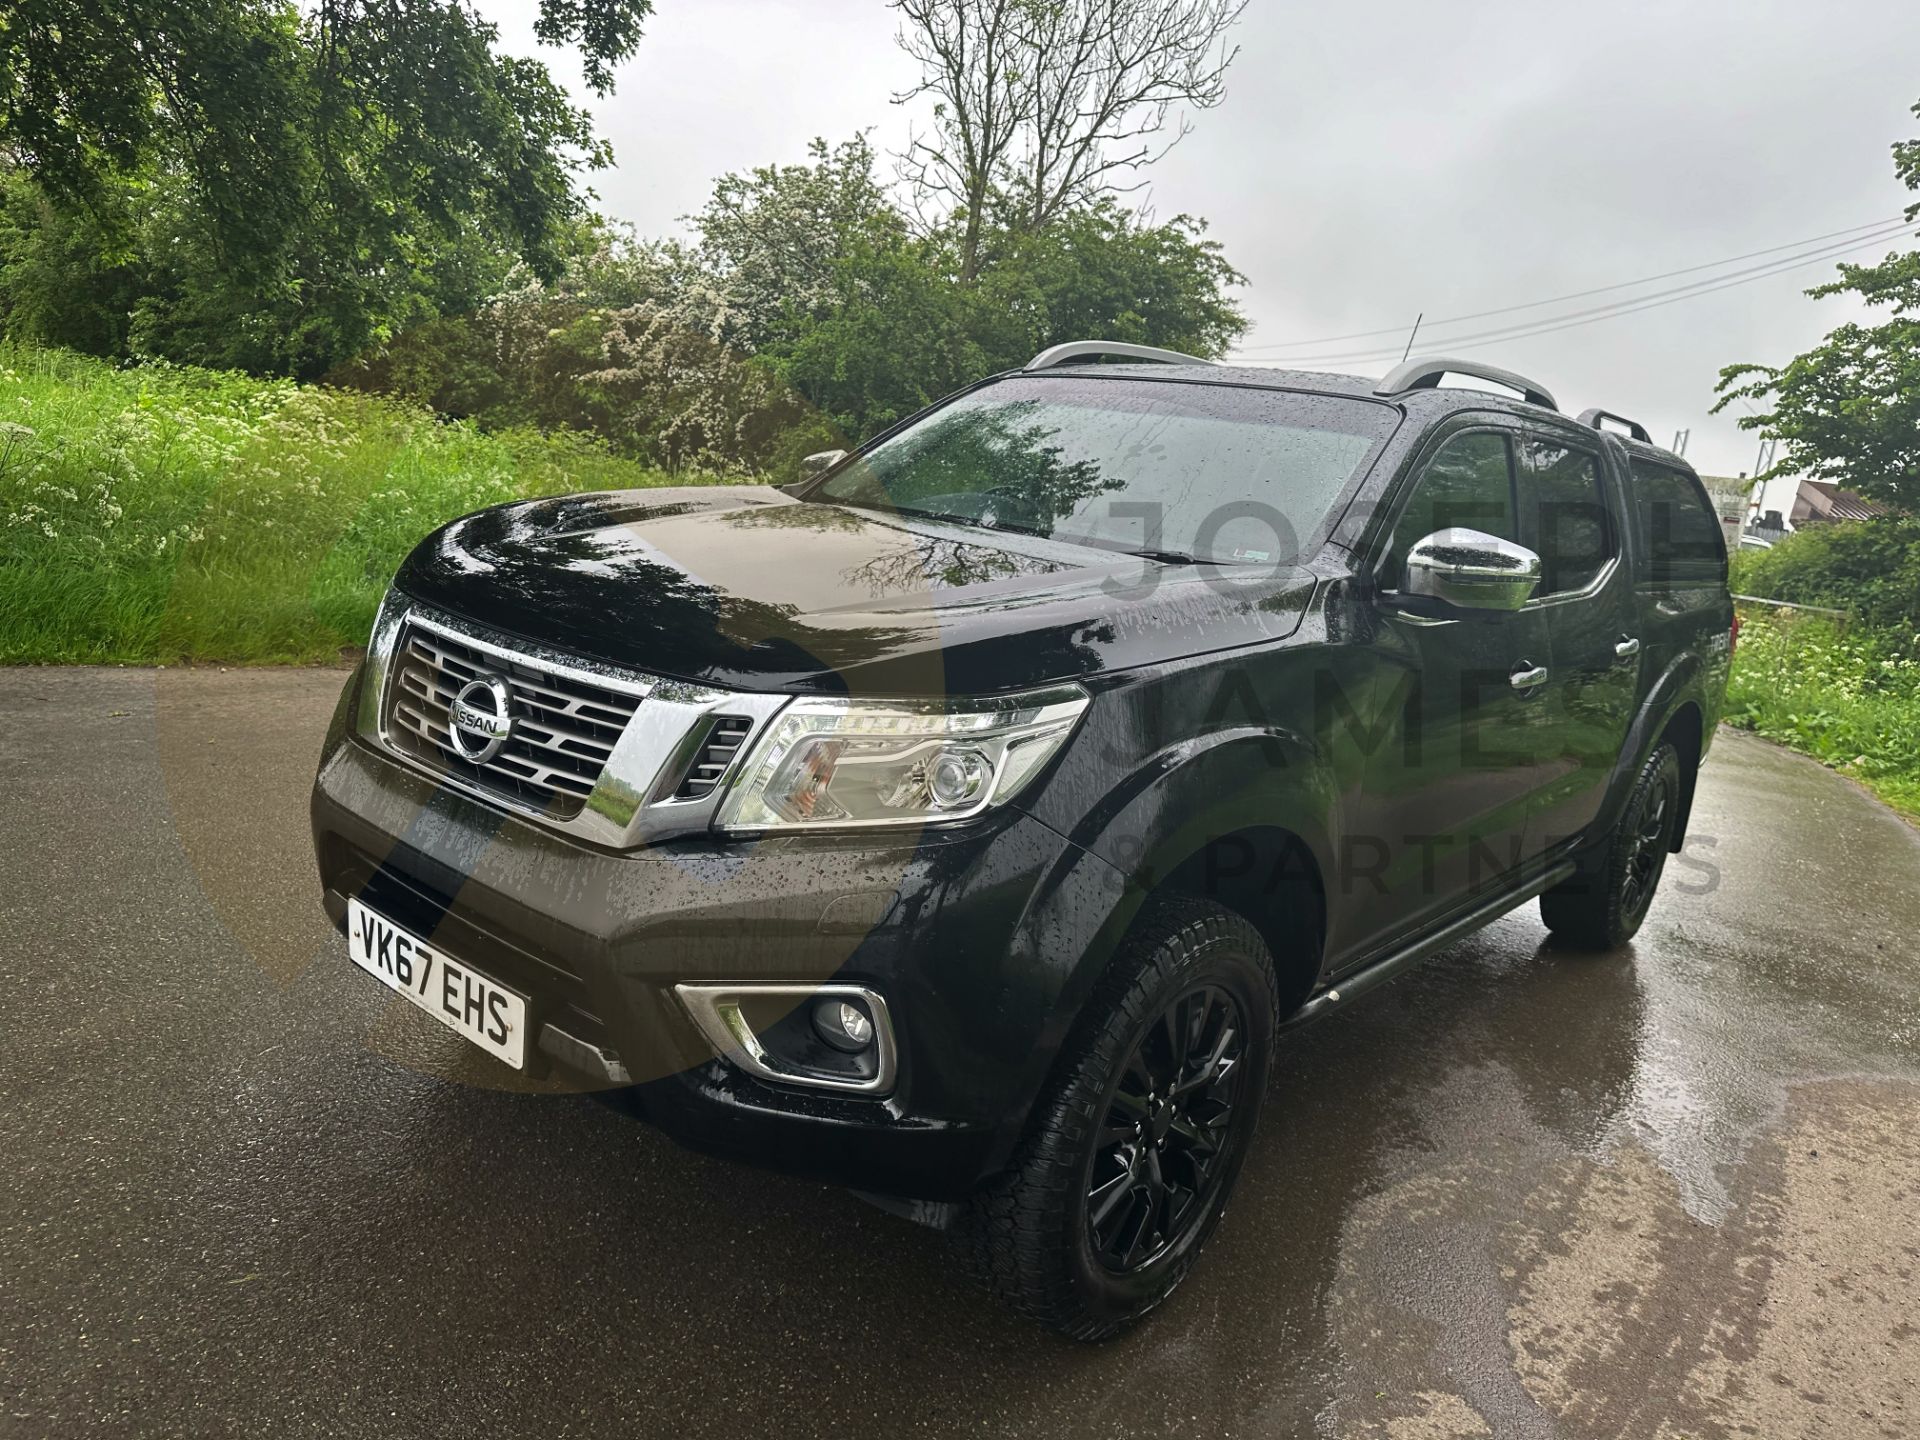 (ON SALE) NISSAN NAVARA *TREK-1 EDITION* DOUBLE CAB PICK-UP (2018 - EURO 6) 2.3 DCI - AUTOMATIC - Image 5 of 52